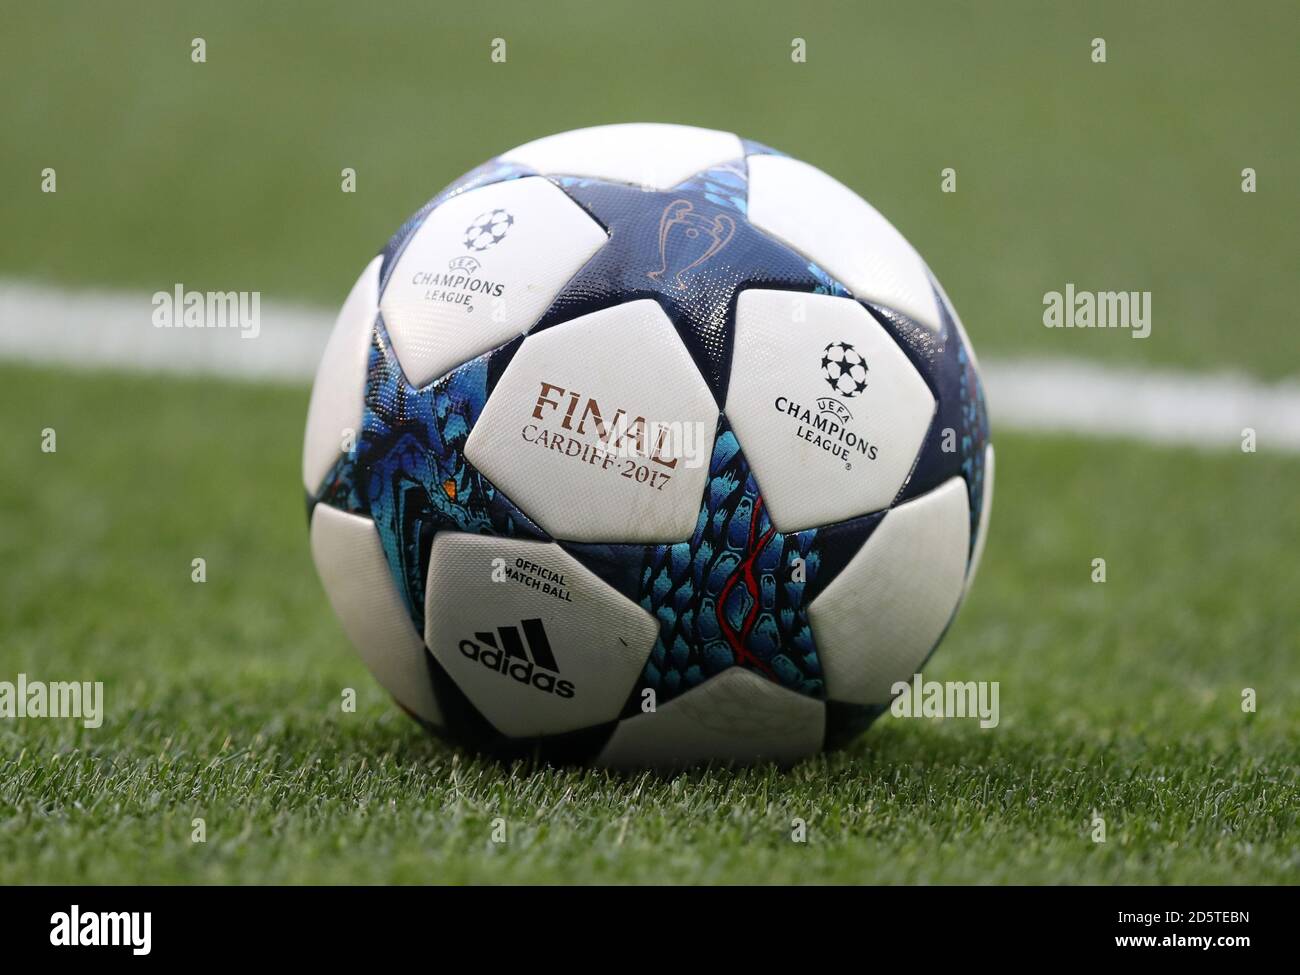 A general view of an Adidas Champions League Match Ball Stock Photo - Alamy